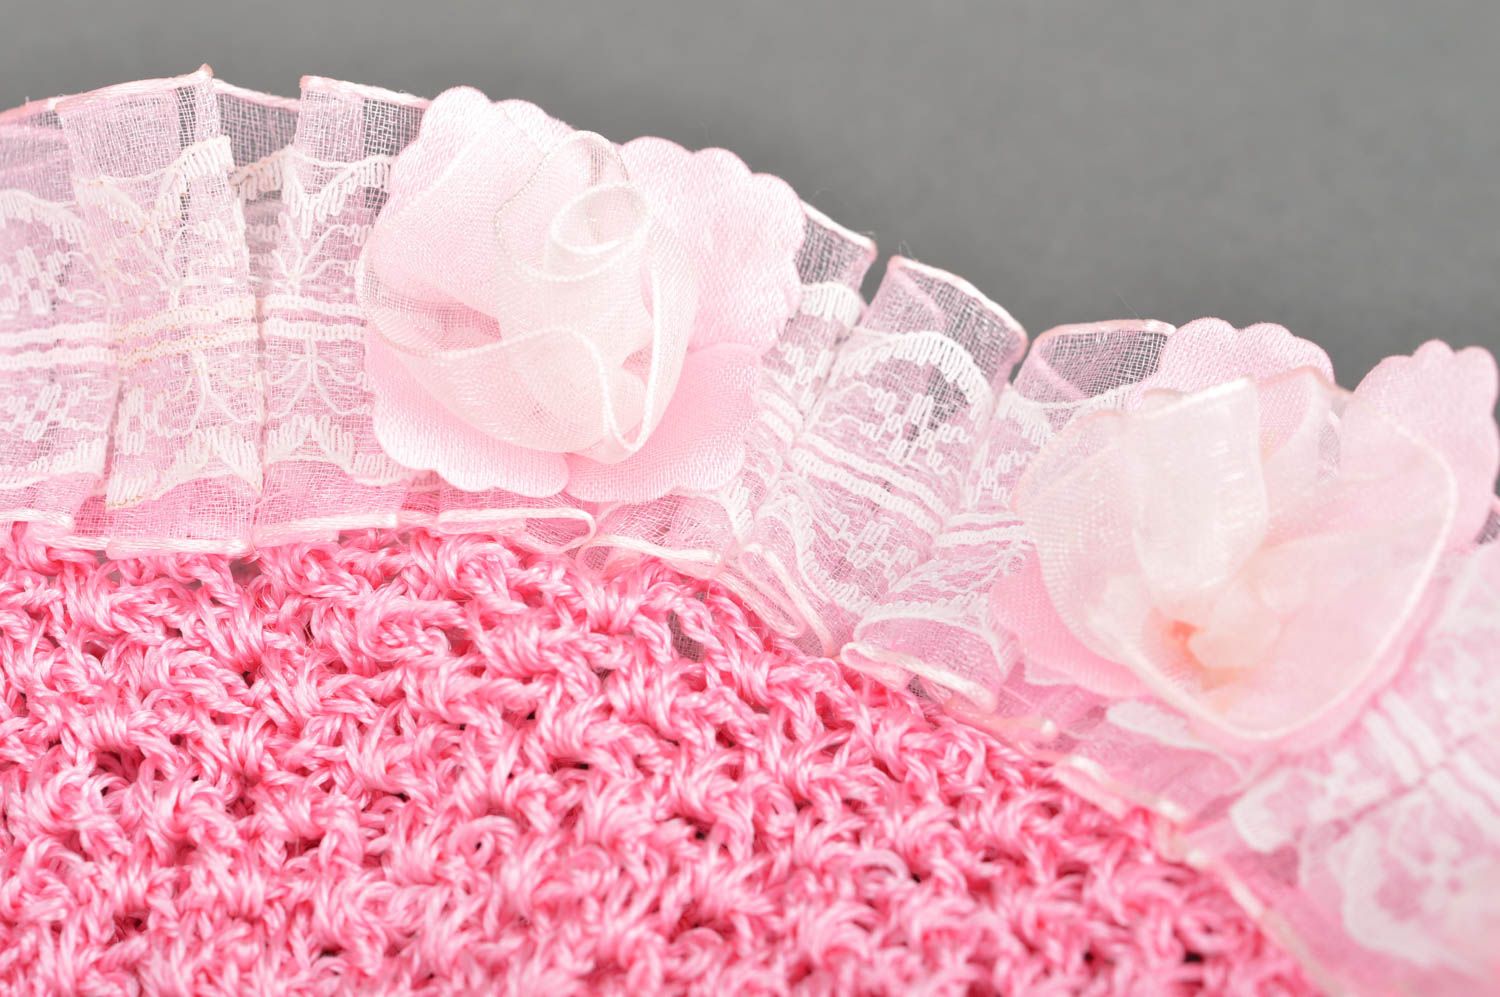 Handmade decorative bottle cozy crocheted pink dress with lacy hat cover photo 4